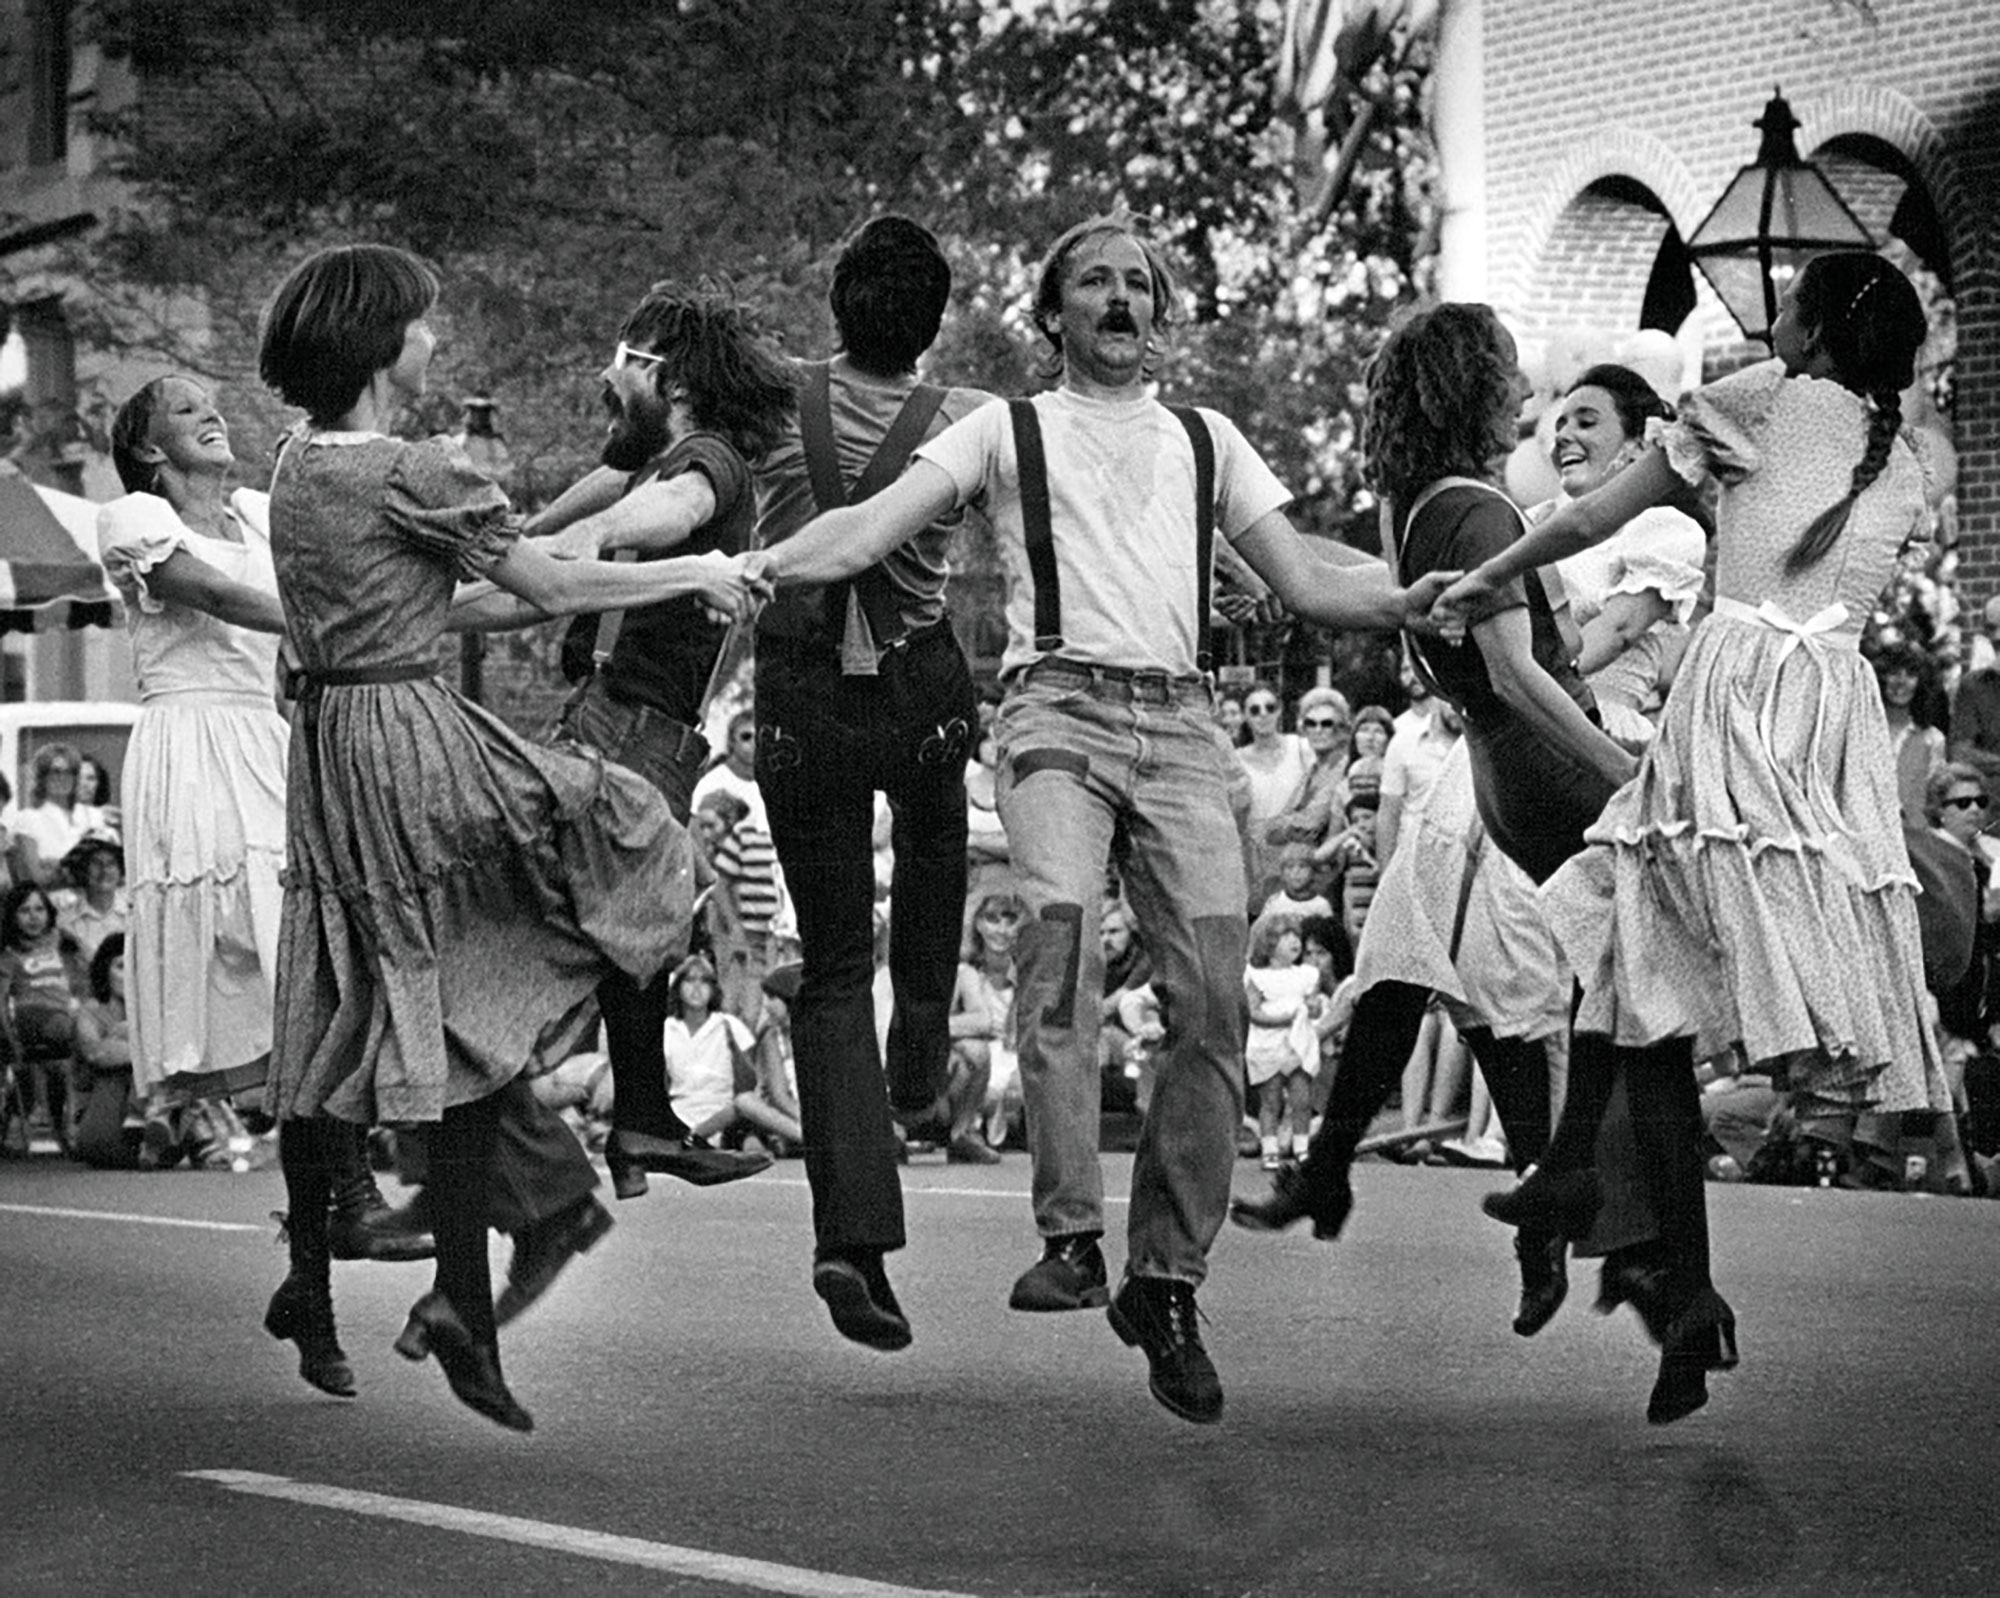 Members of the Hoofin High Country Cloggers lead dancing in the third annual Labor Day Weekend Hoedown in Larimer Square in 1979 in Denver.Ernie Leyba— Denver Post via Getty Images